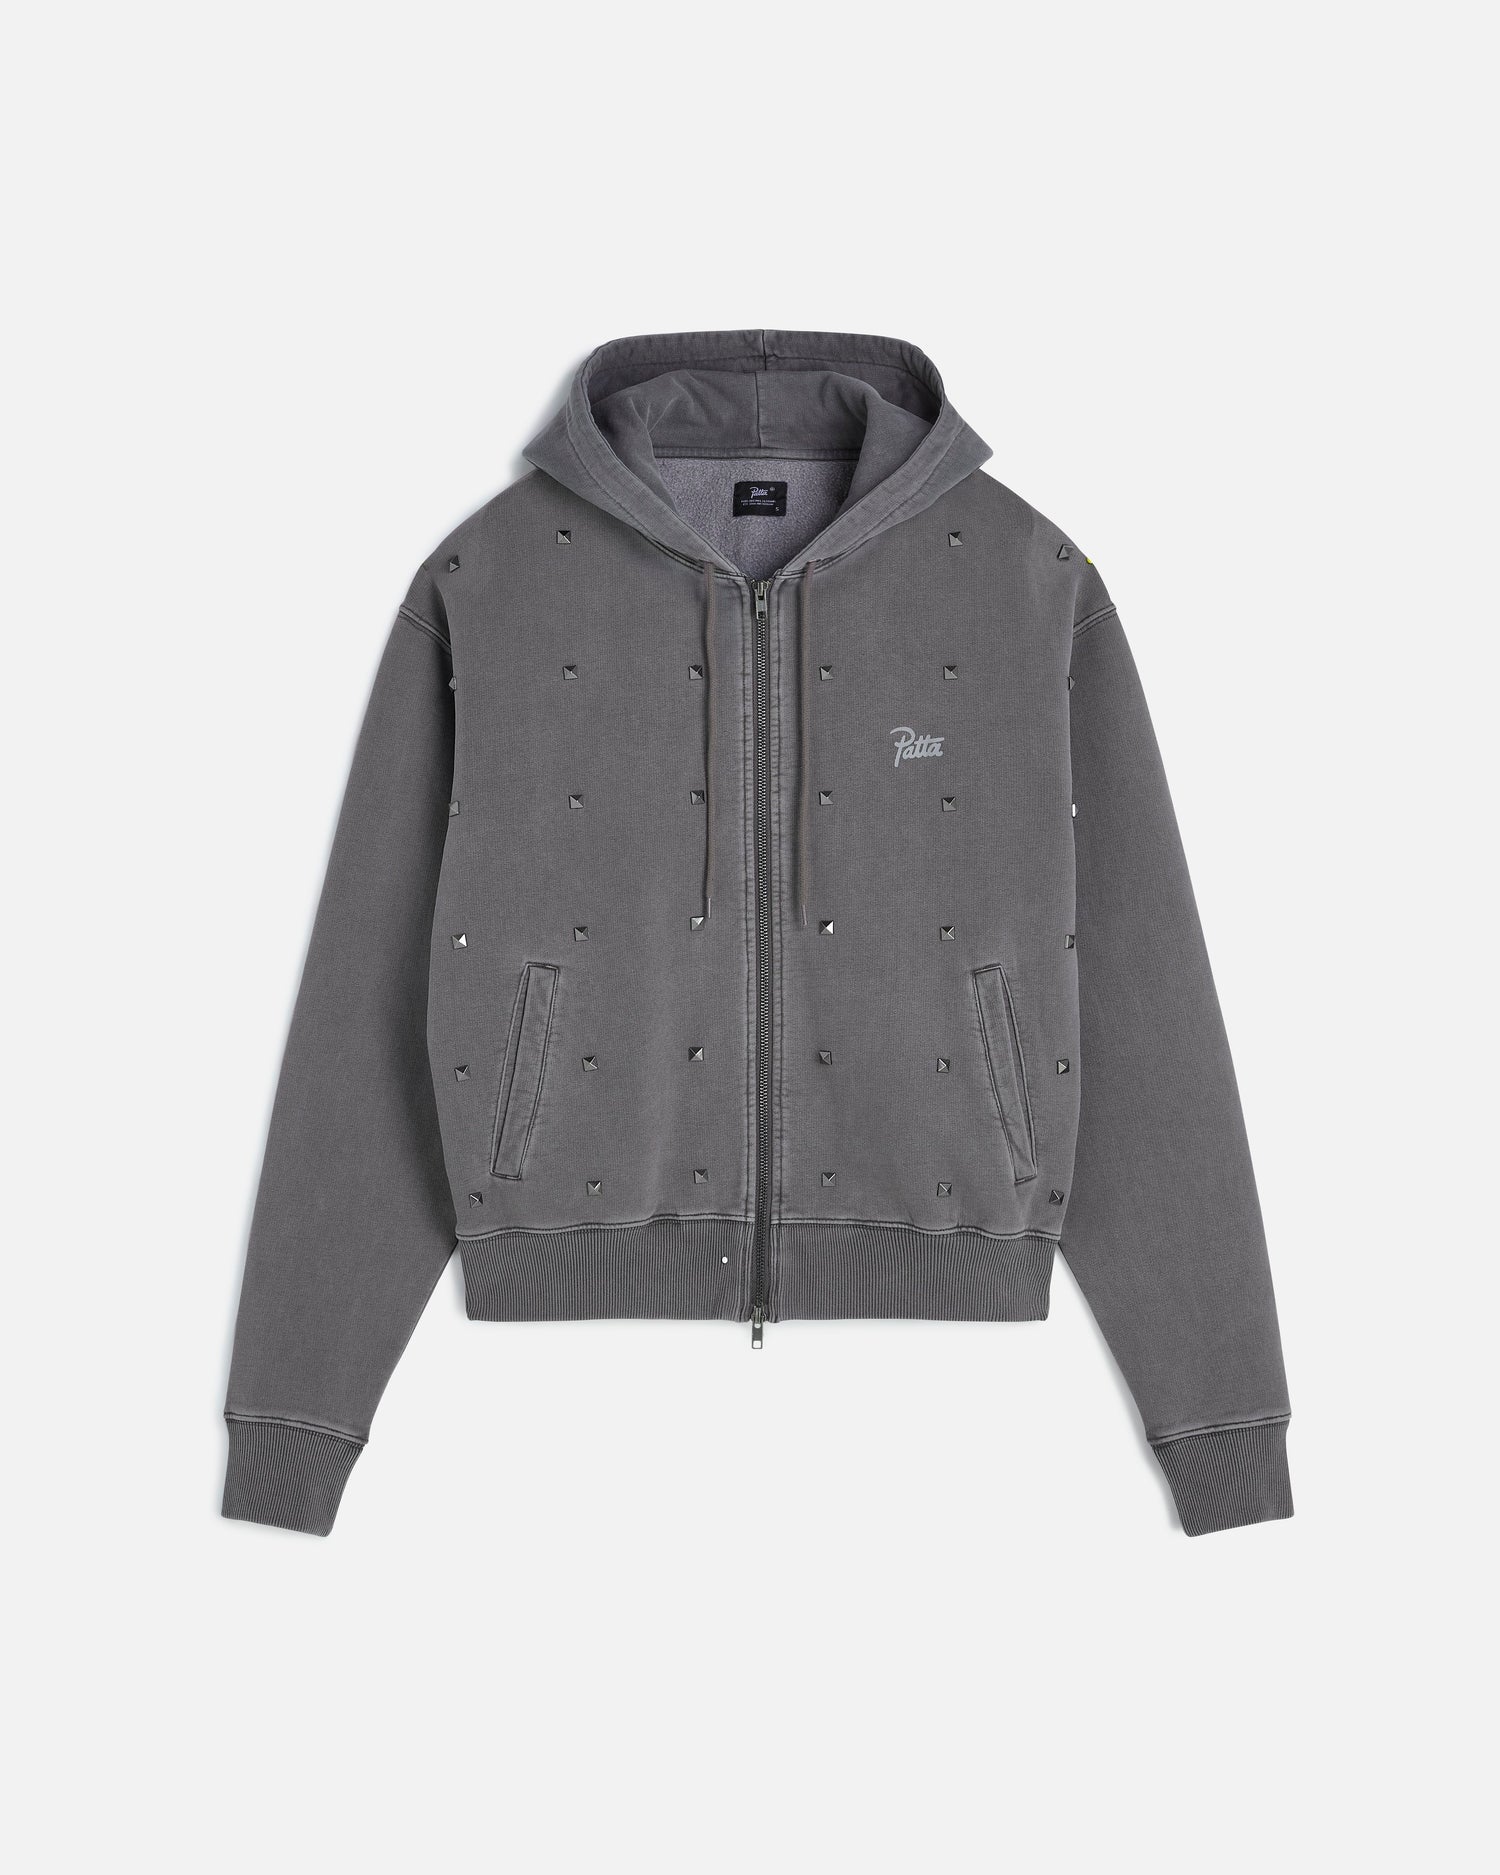 Patta Studded Washed Zip Up Hooded Sweater (Volcanic Glass)